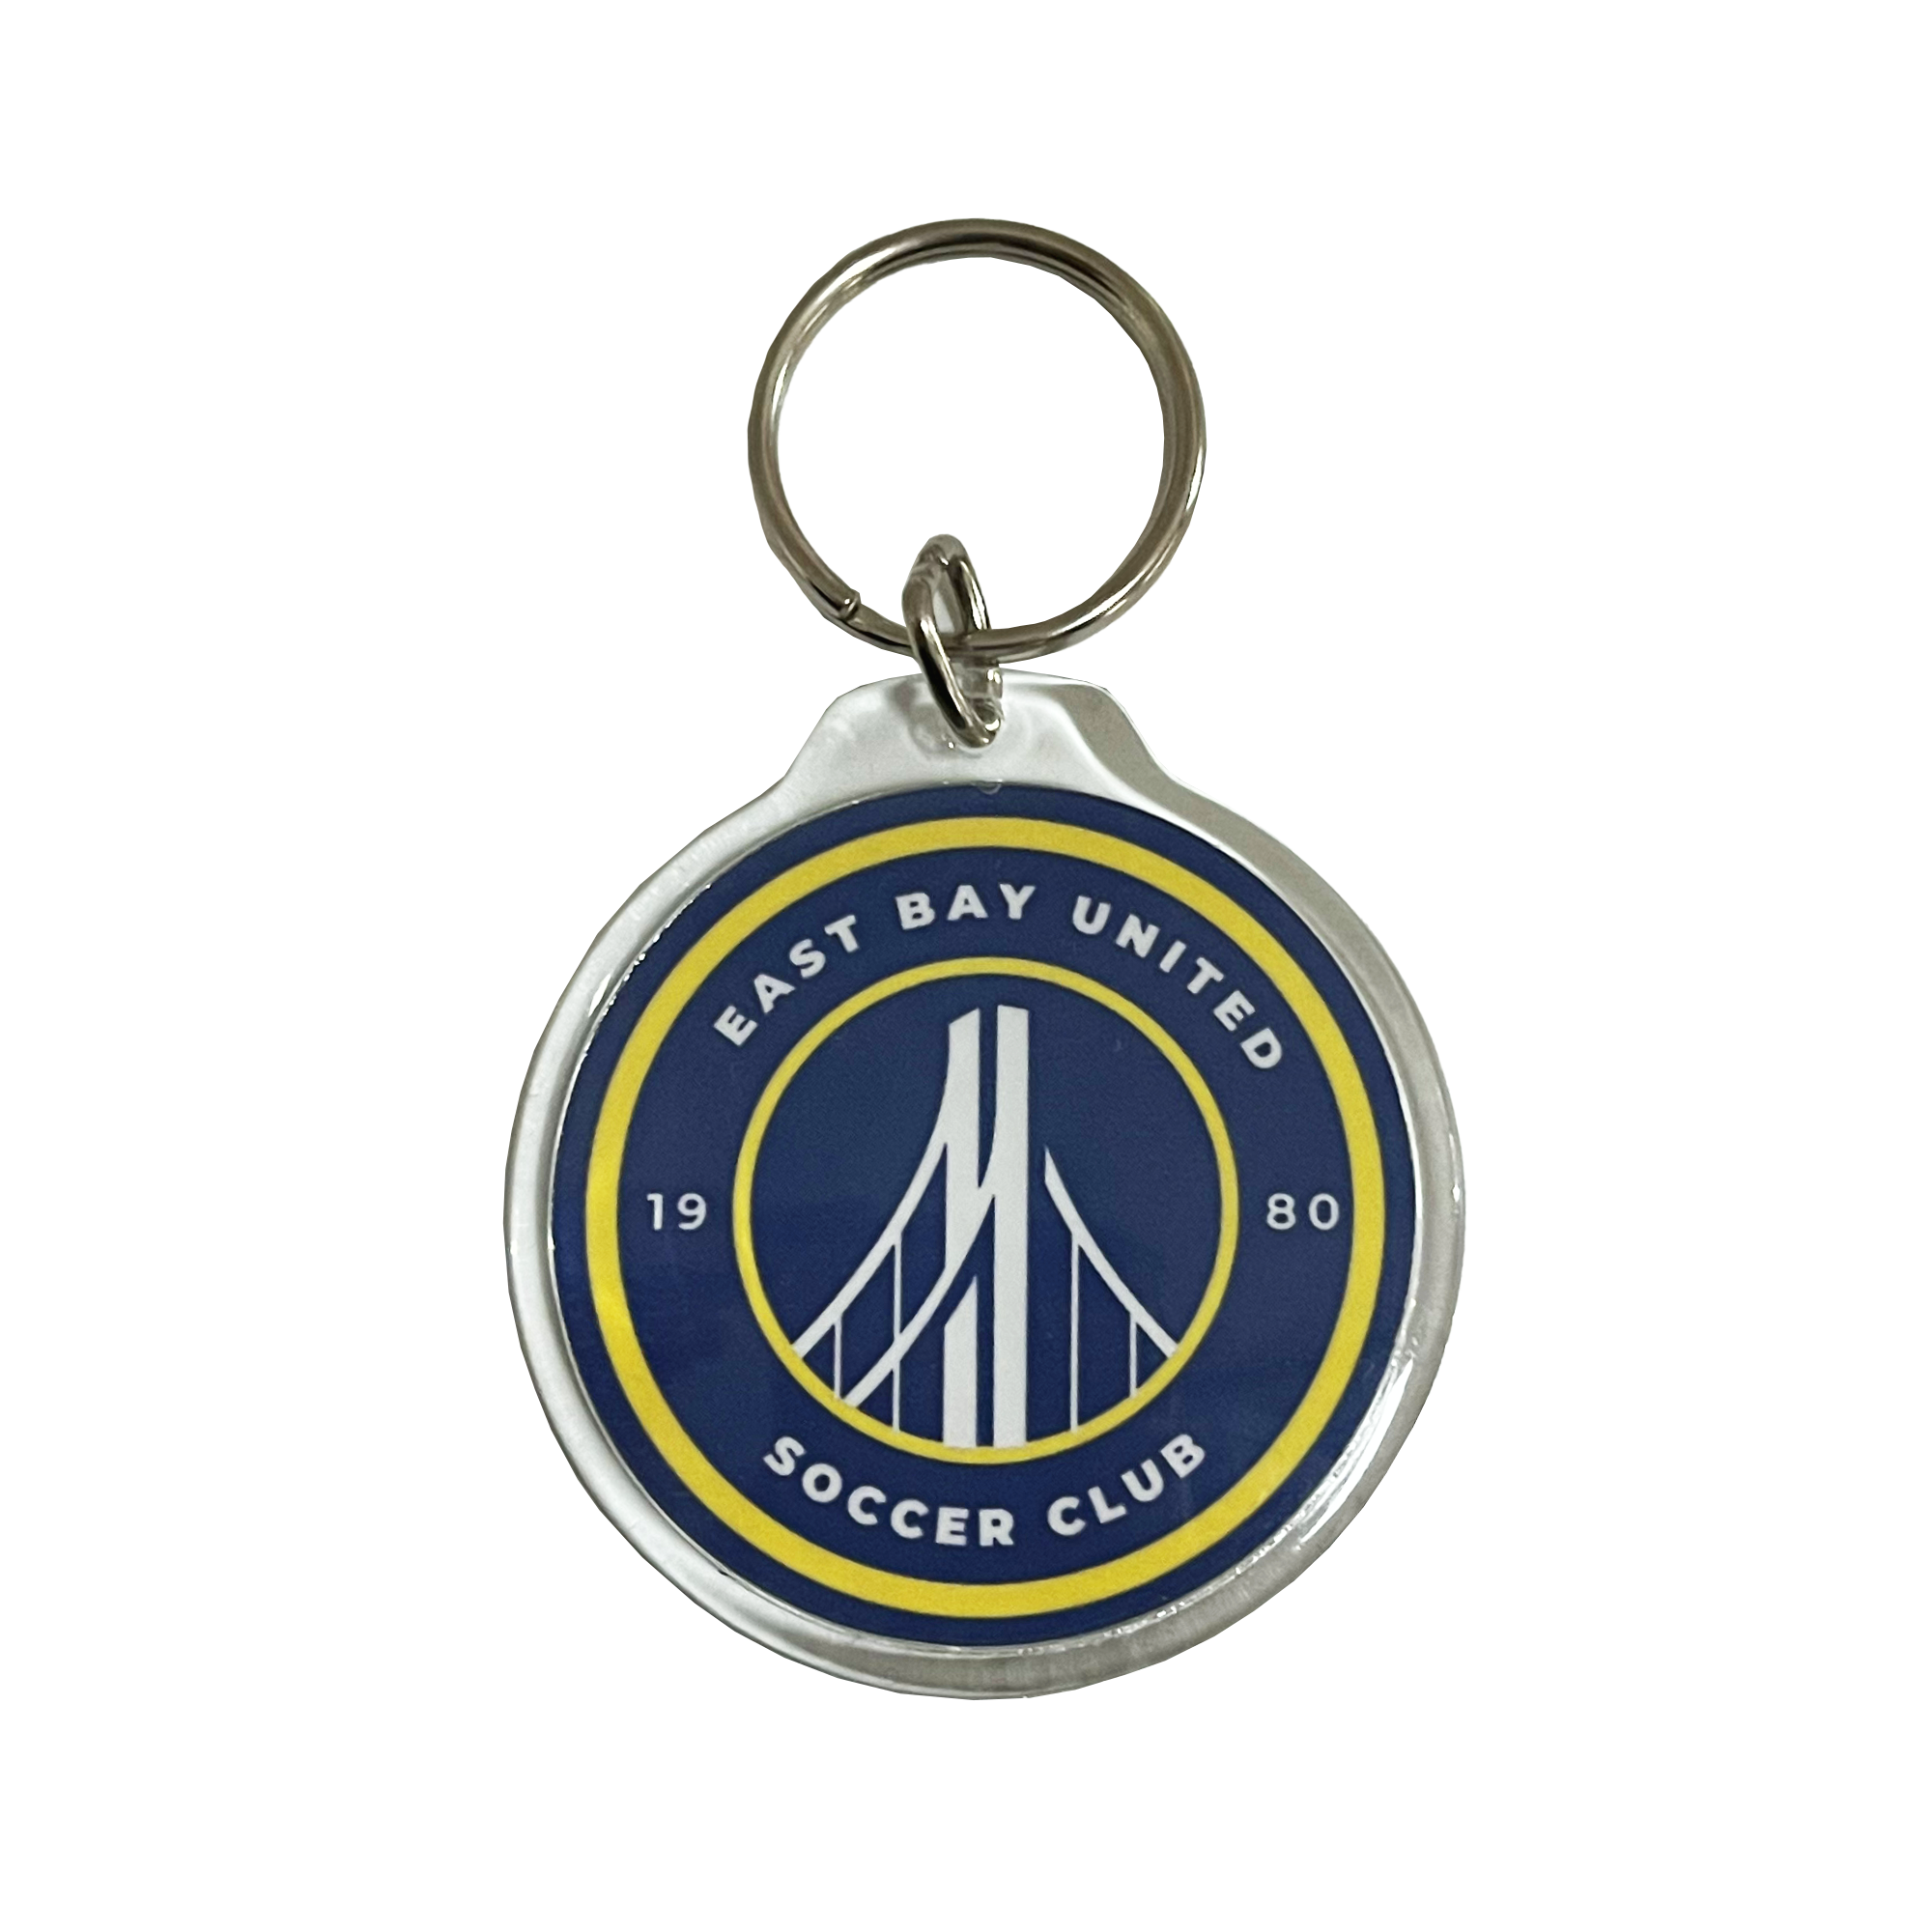 Metal key chain with blue and yellow logo of the the East Bay United Soccer Club,.